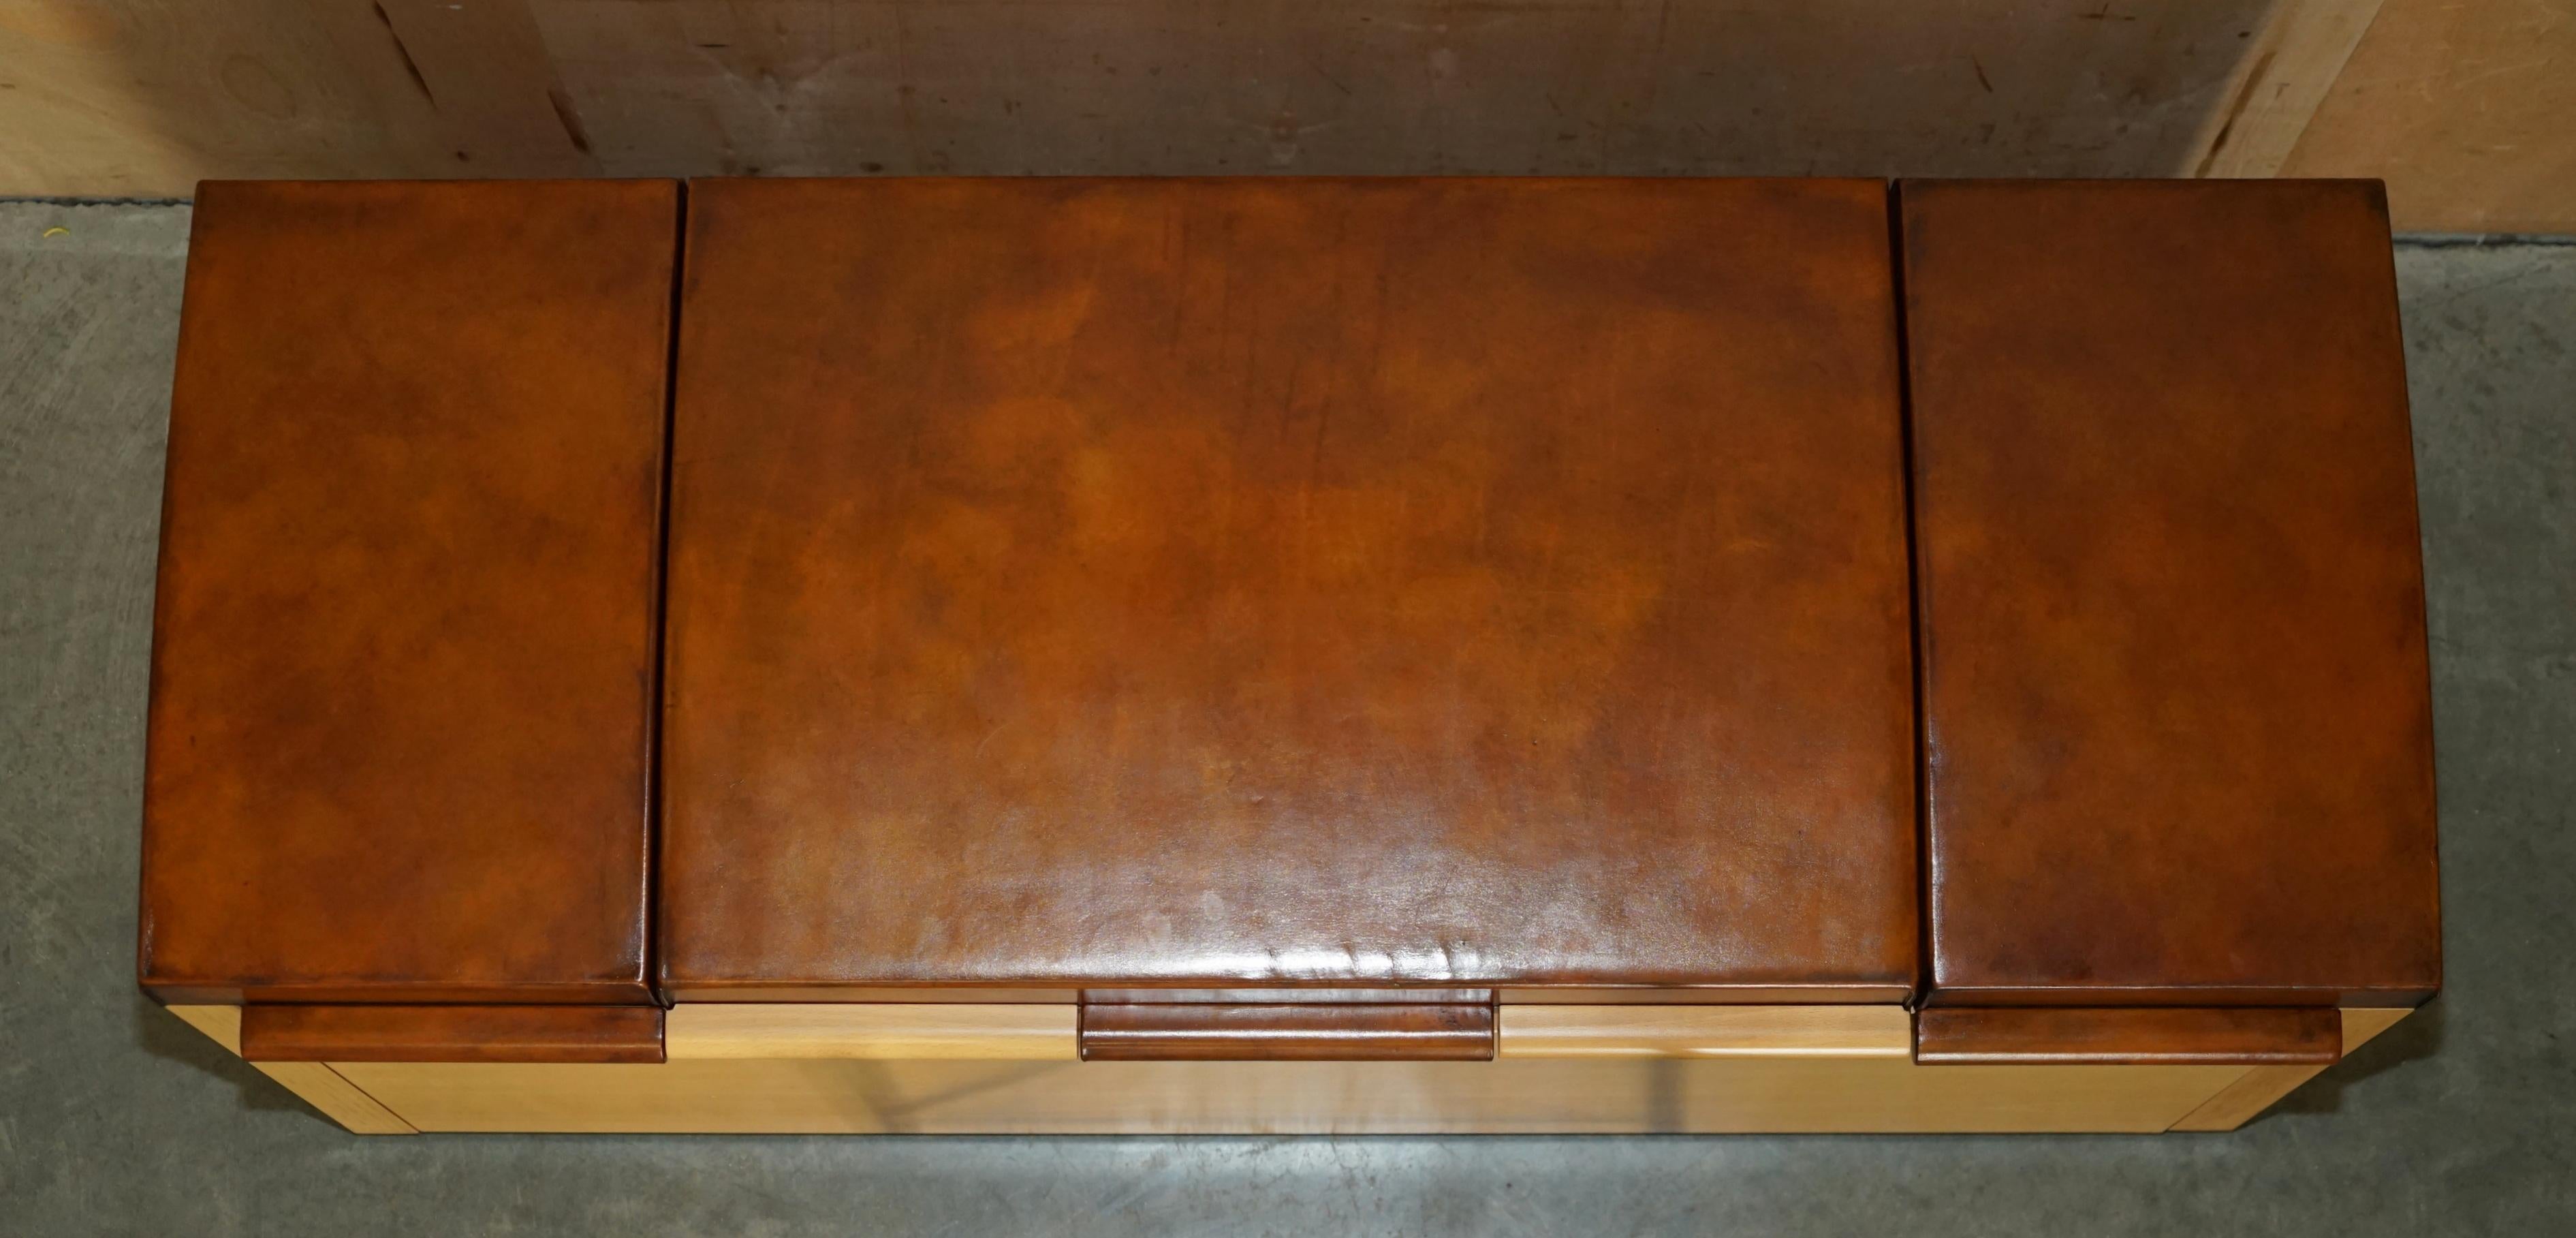 Hand-Crafted 1 OF 1 HERMES PARIS JOHN LOBB EXTRA LARGE SHOE TRUNK HAND DYED LEATHER PANELs For Sale